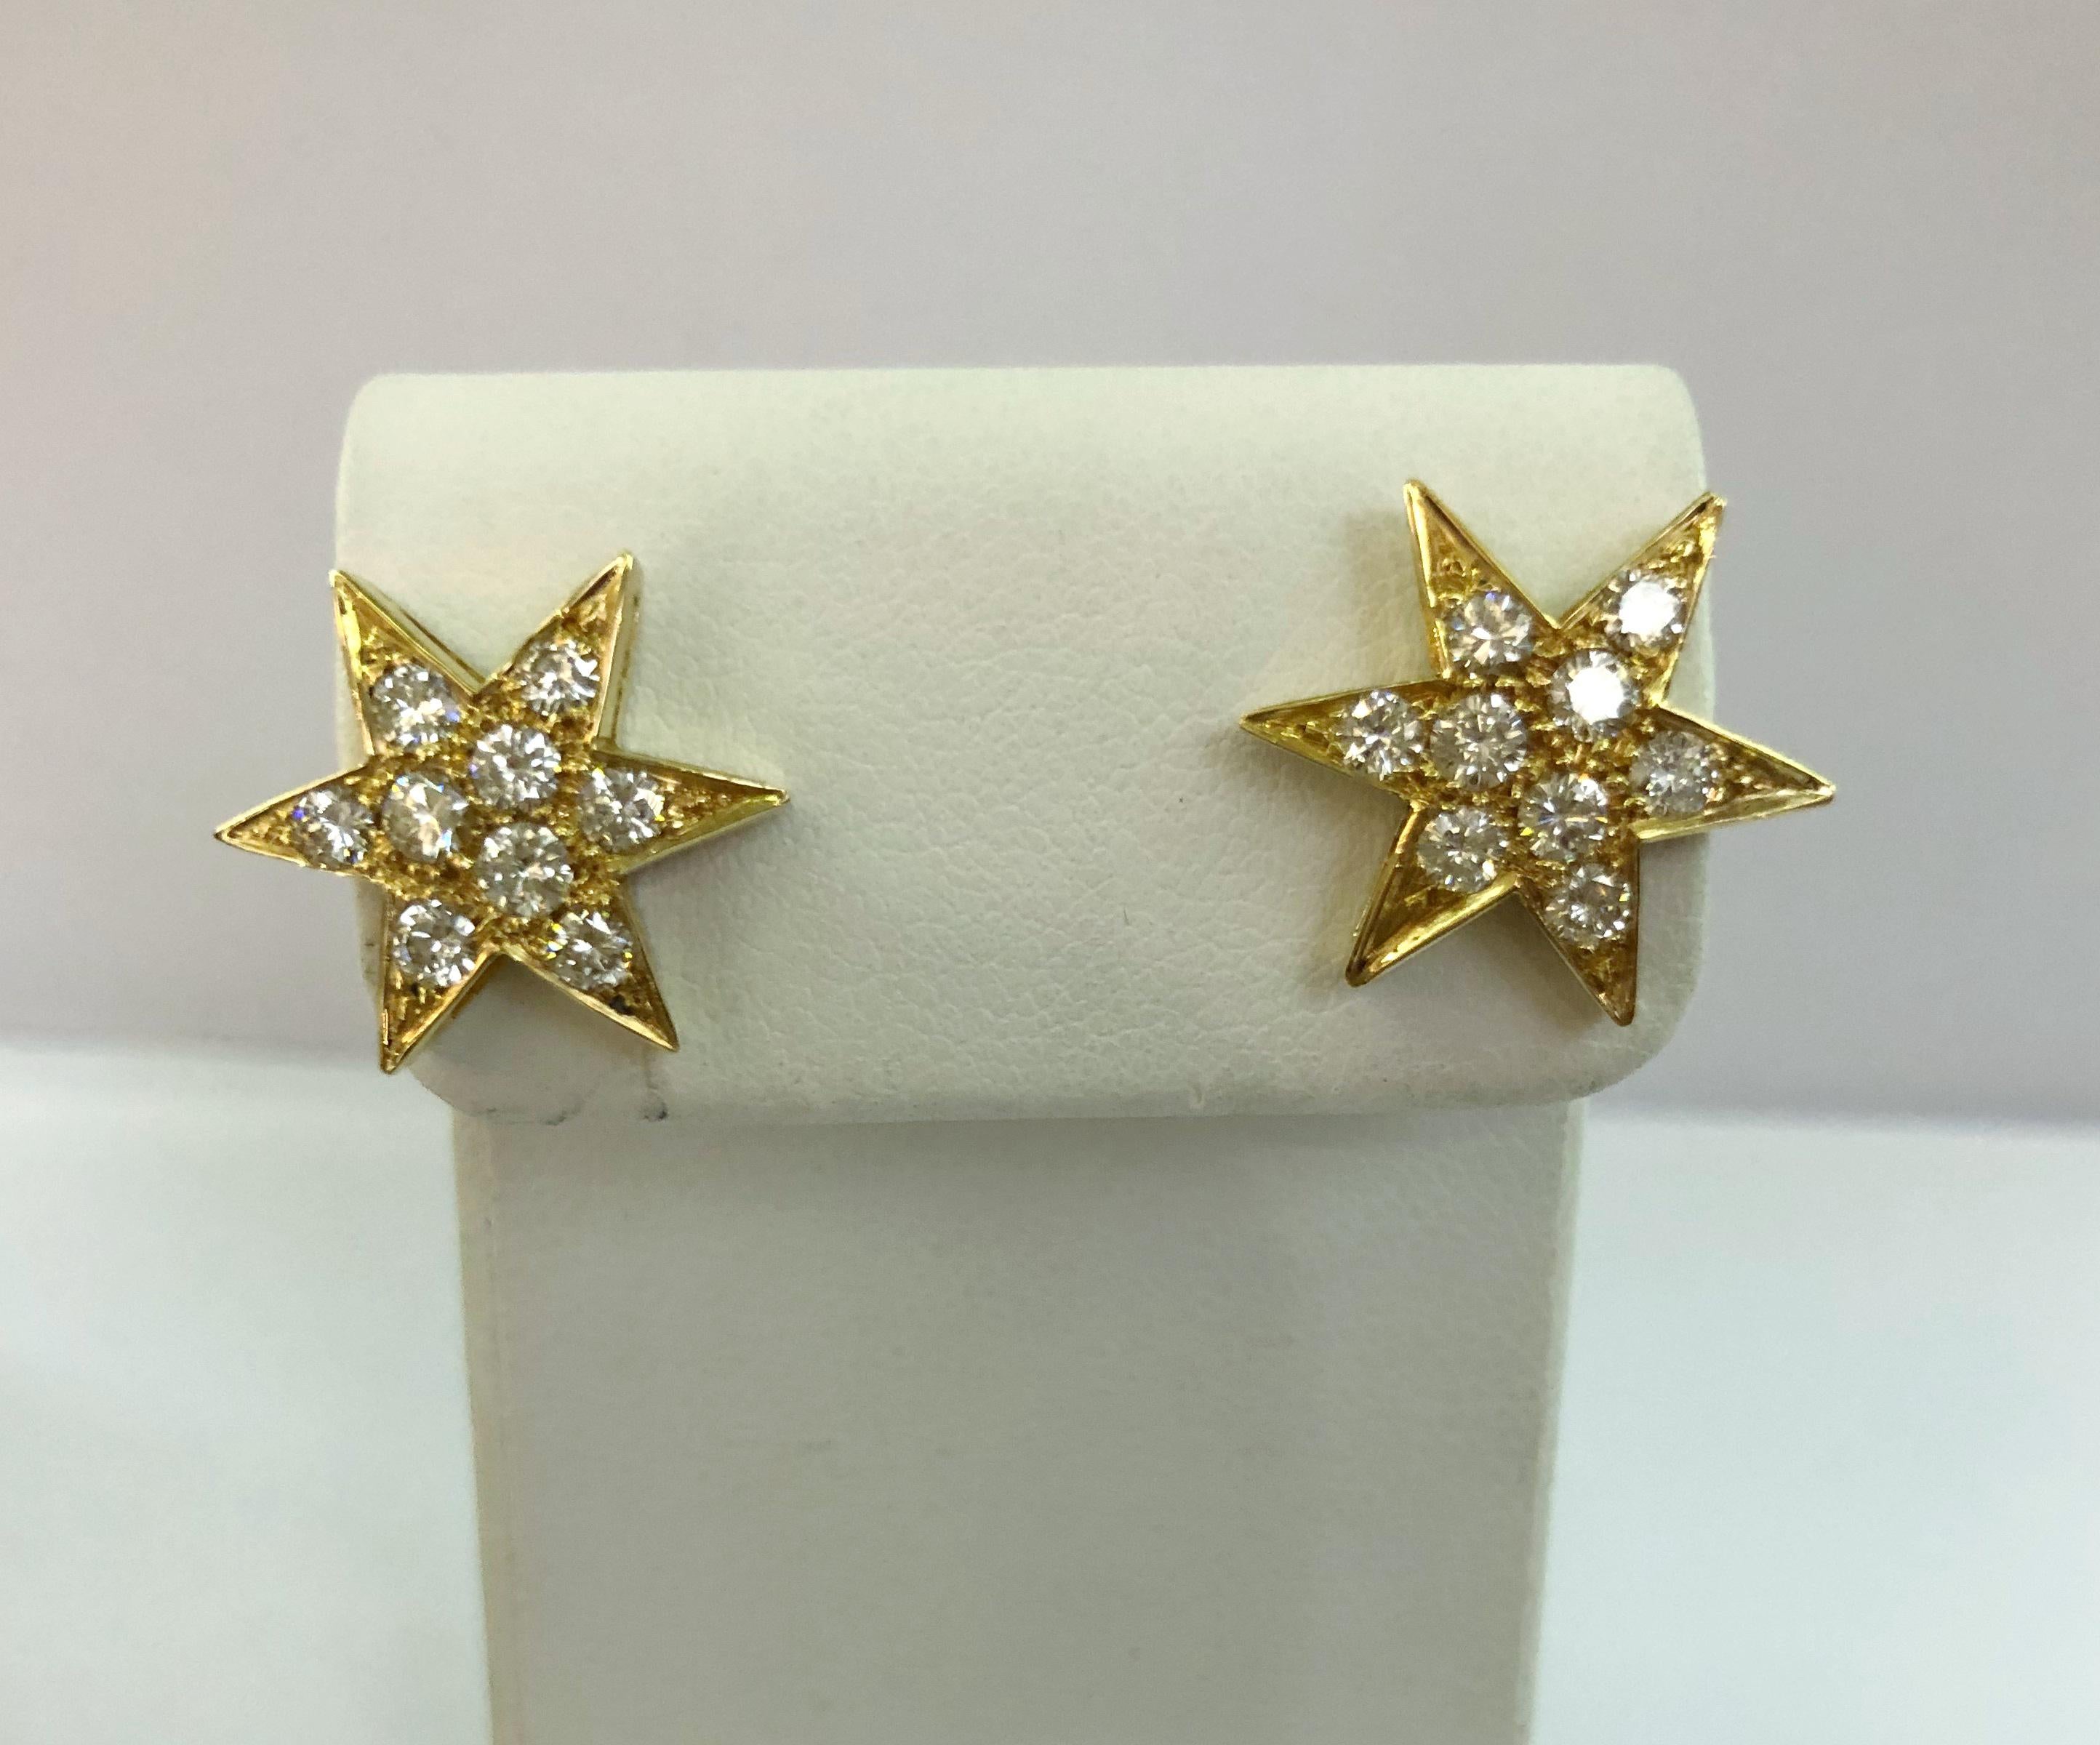 Pair of vintage star shaped earrings with yellow gold and diamonds for a total of 1 karat, Italy 1970-1980s